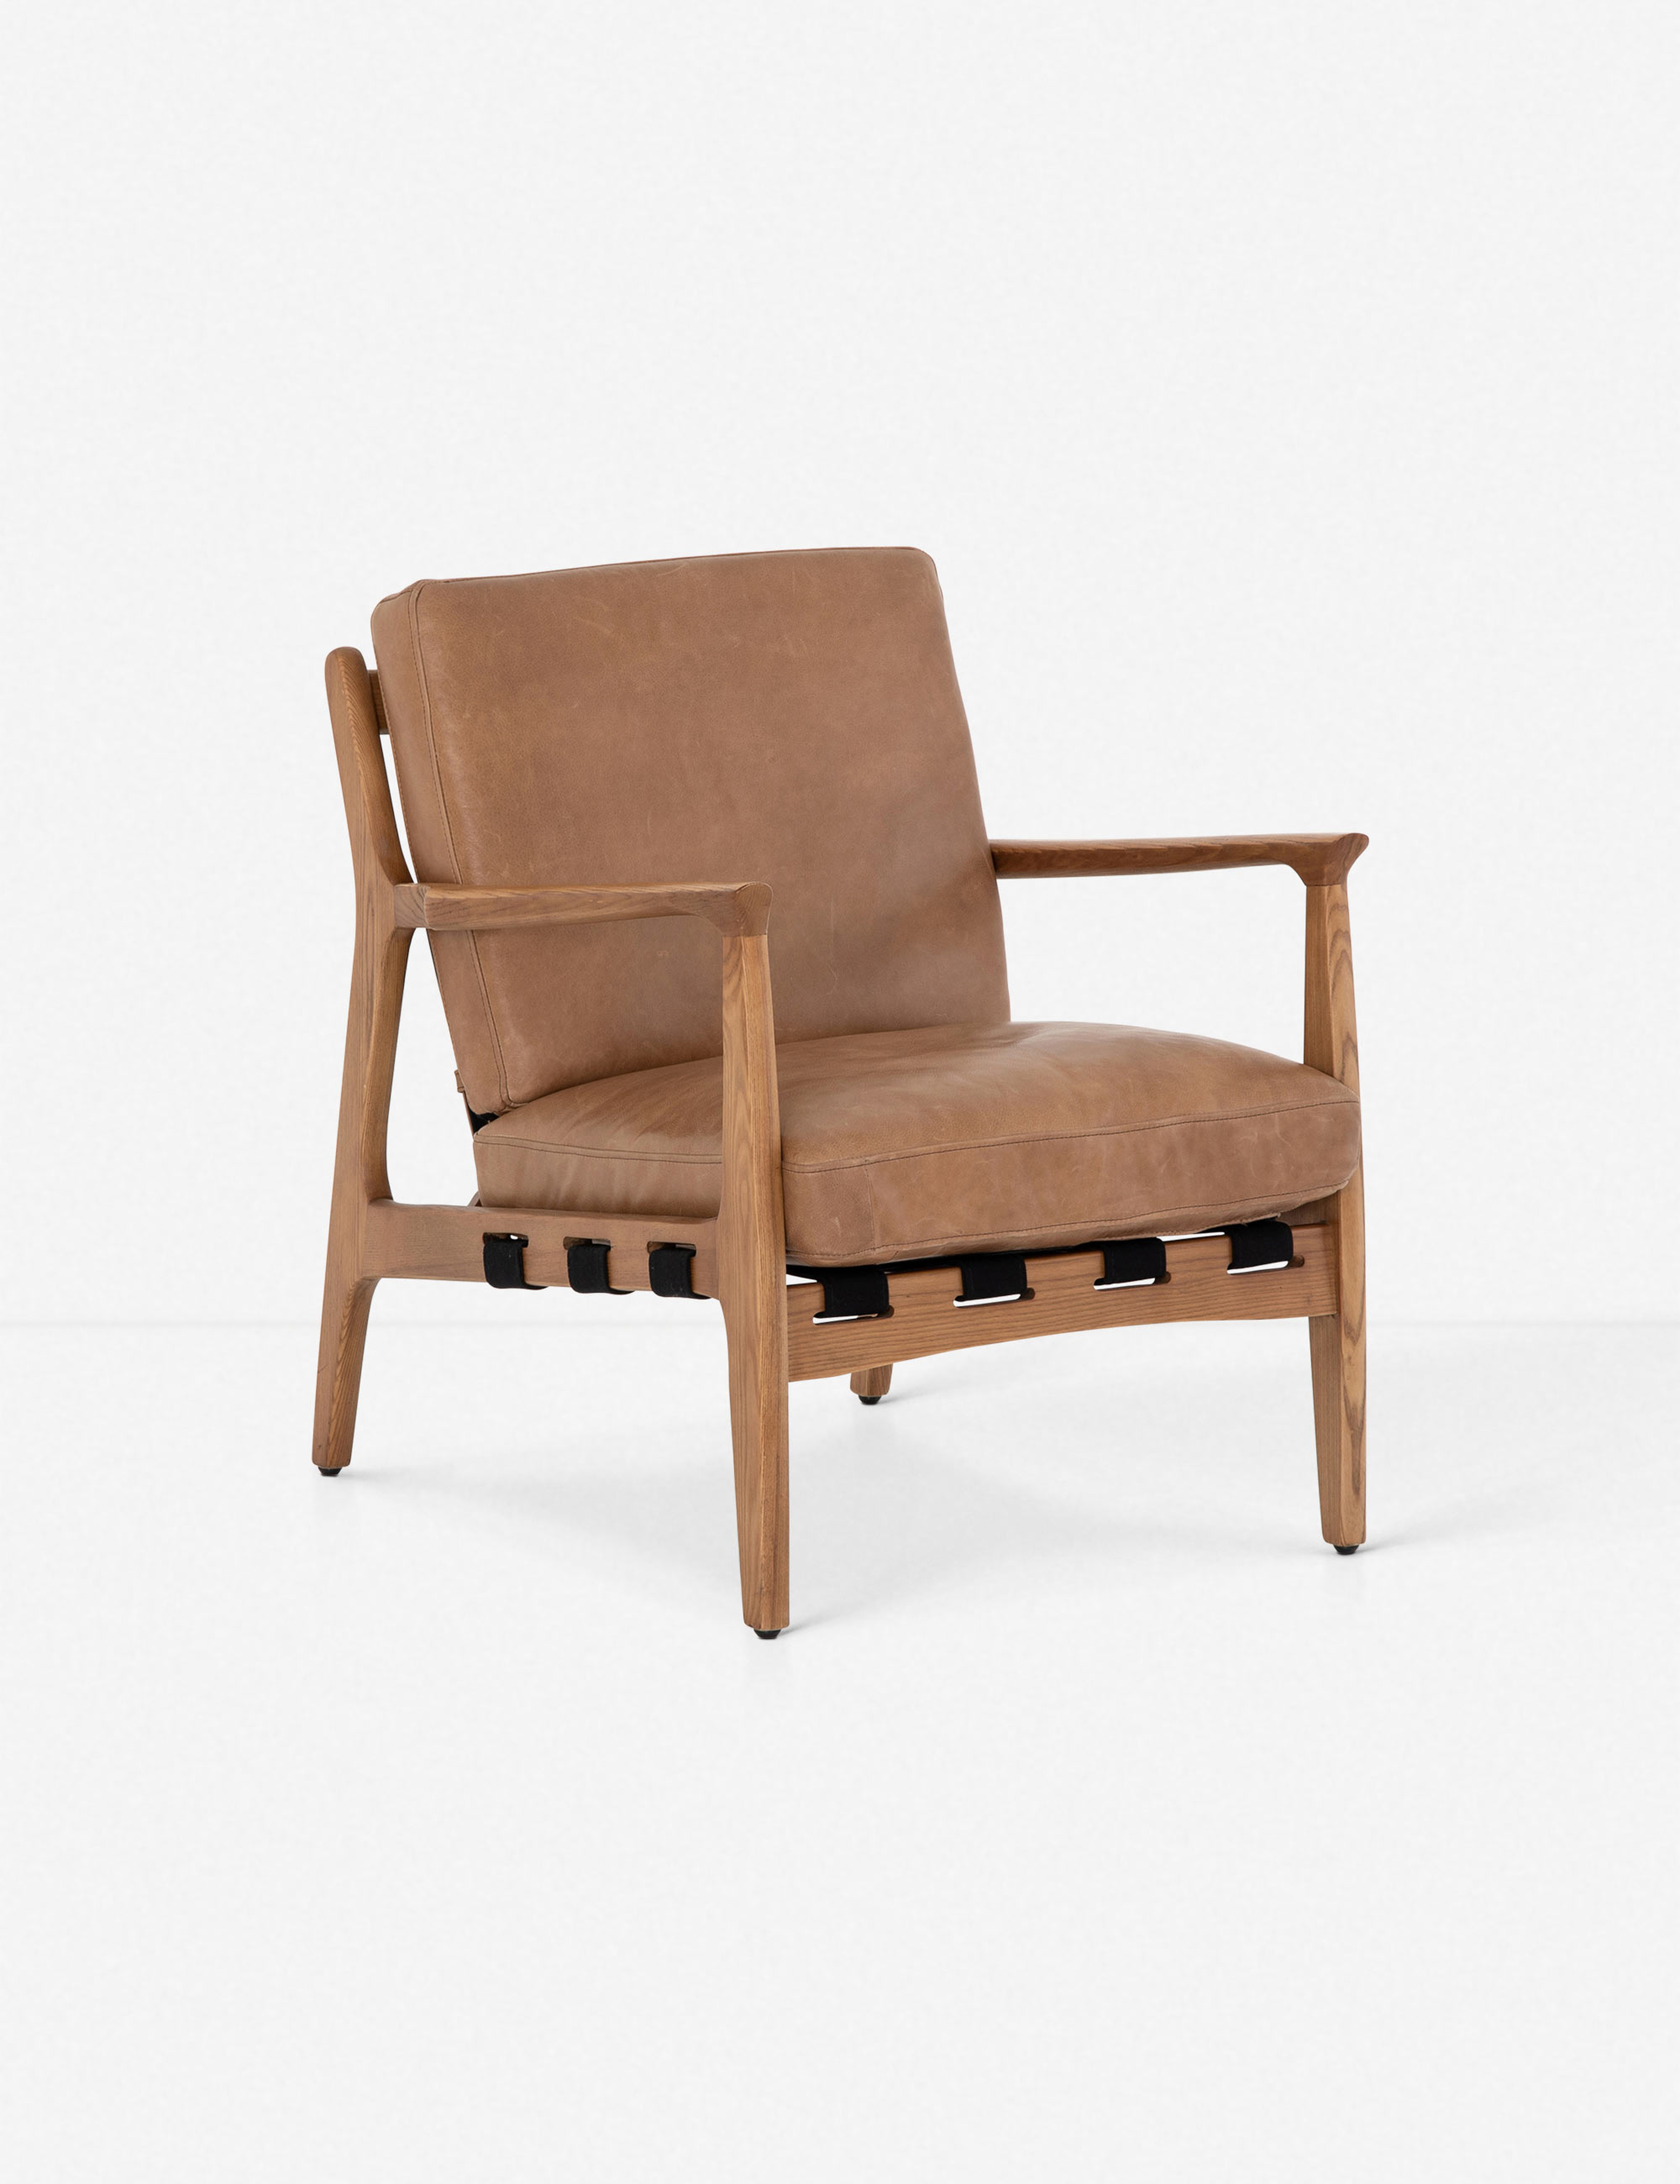 Kenneth Leather Chair, Copper - Lulu and Georgia